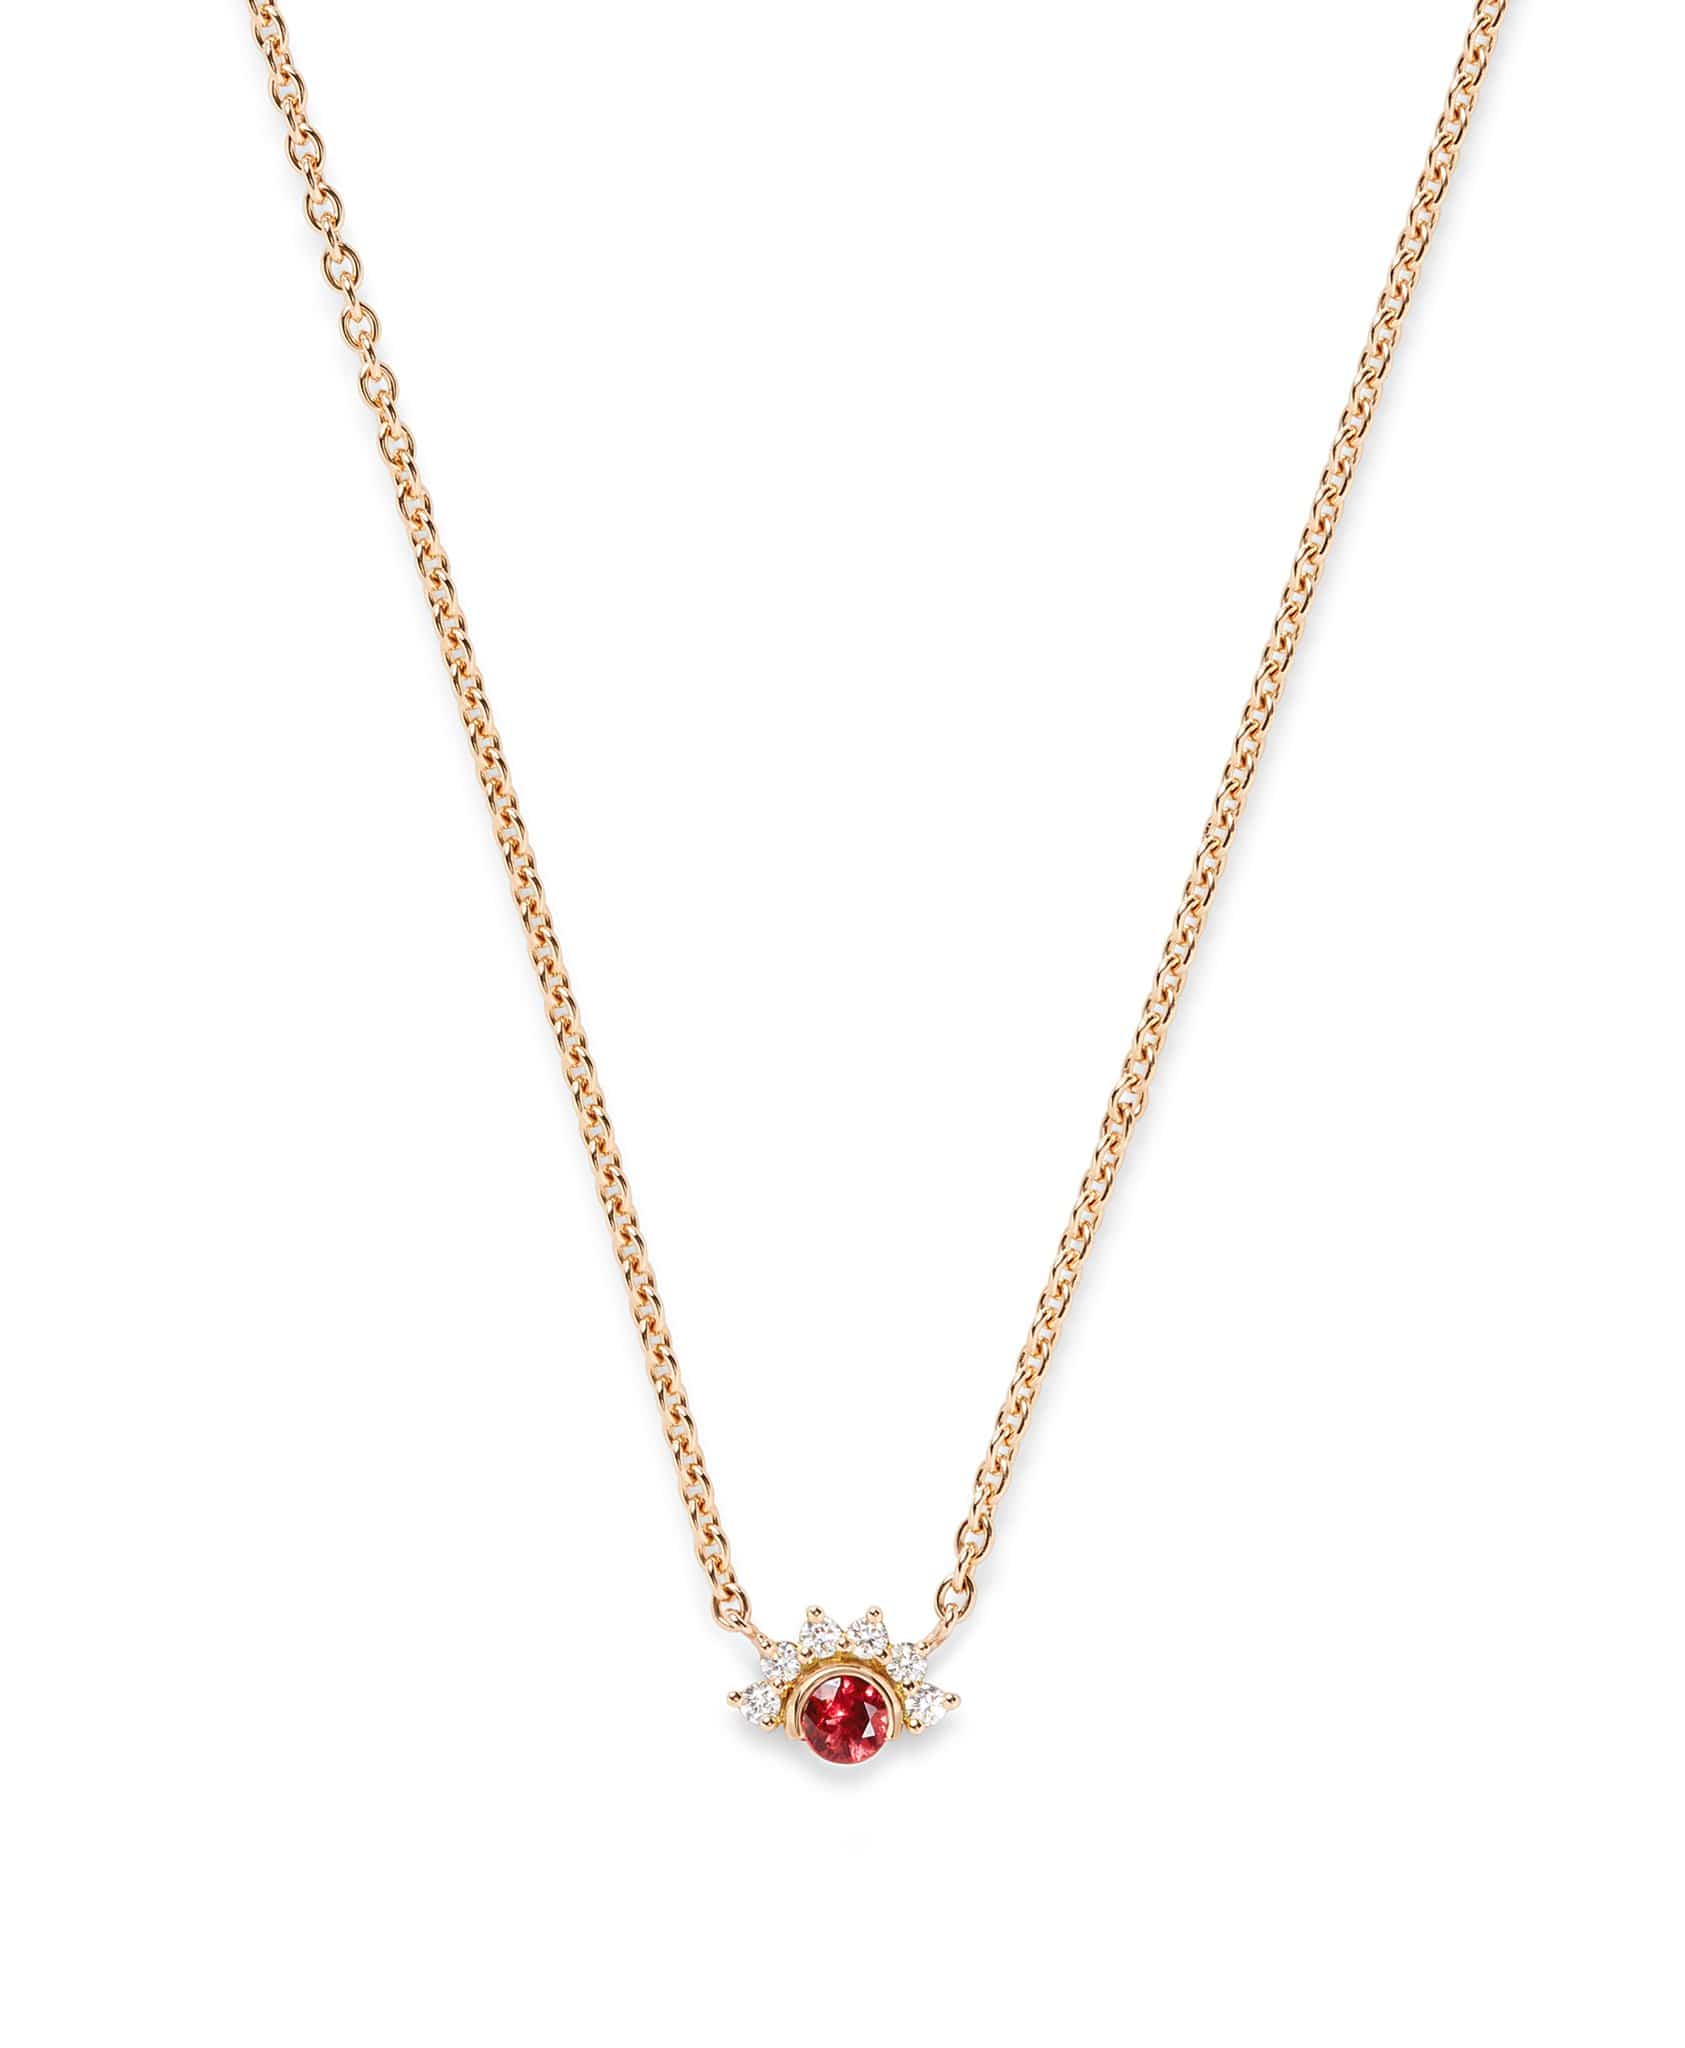 Red Spinel Pendant: Discover Luxury Fine Jewelry | Nouvel Heritage || Yellow Gold